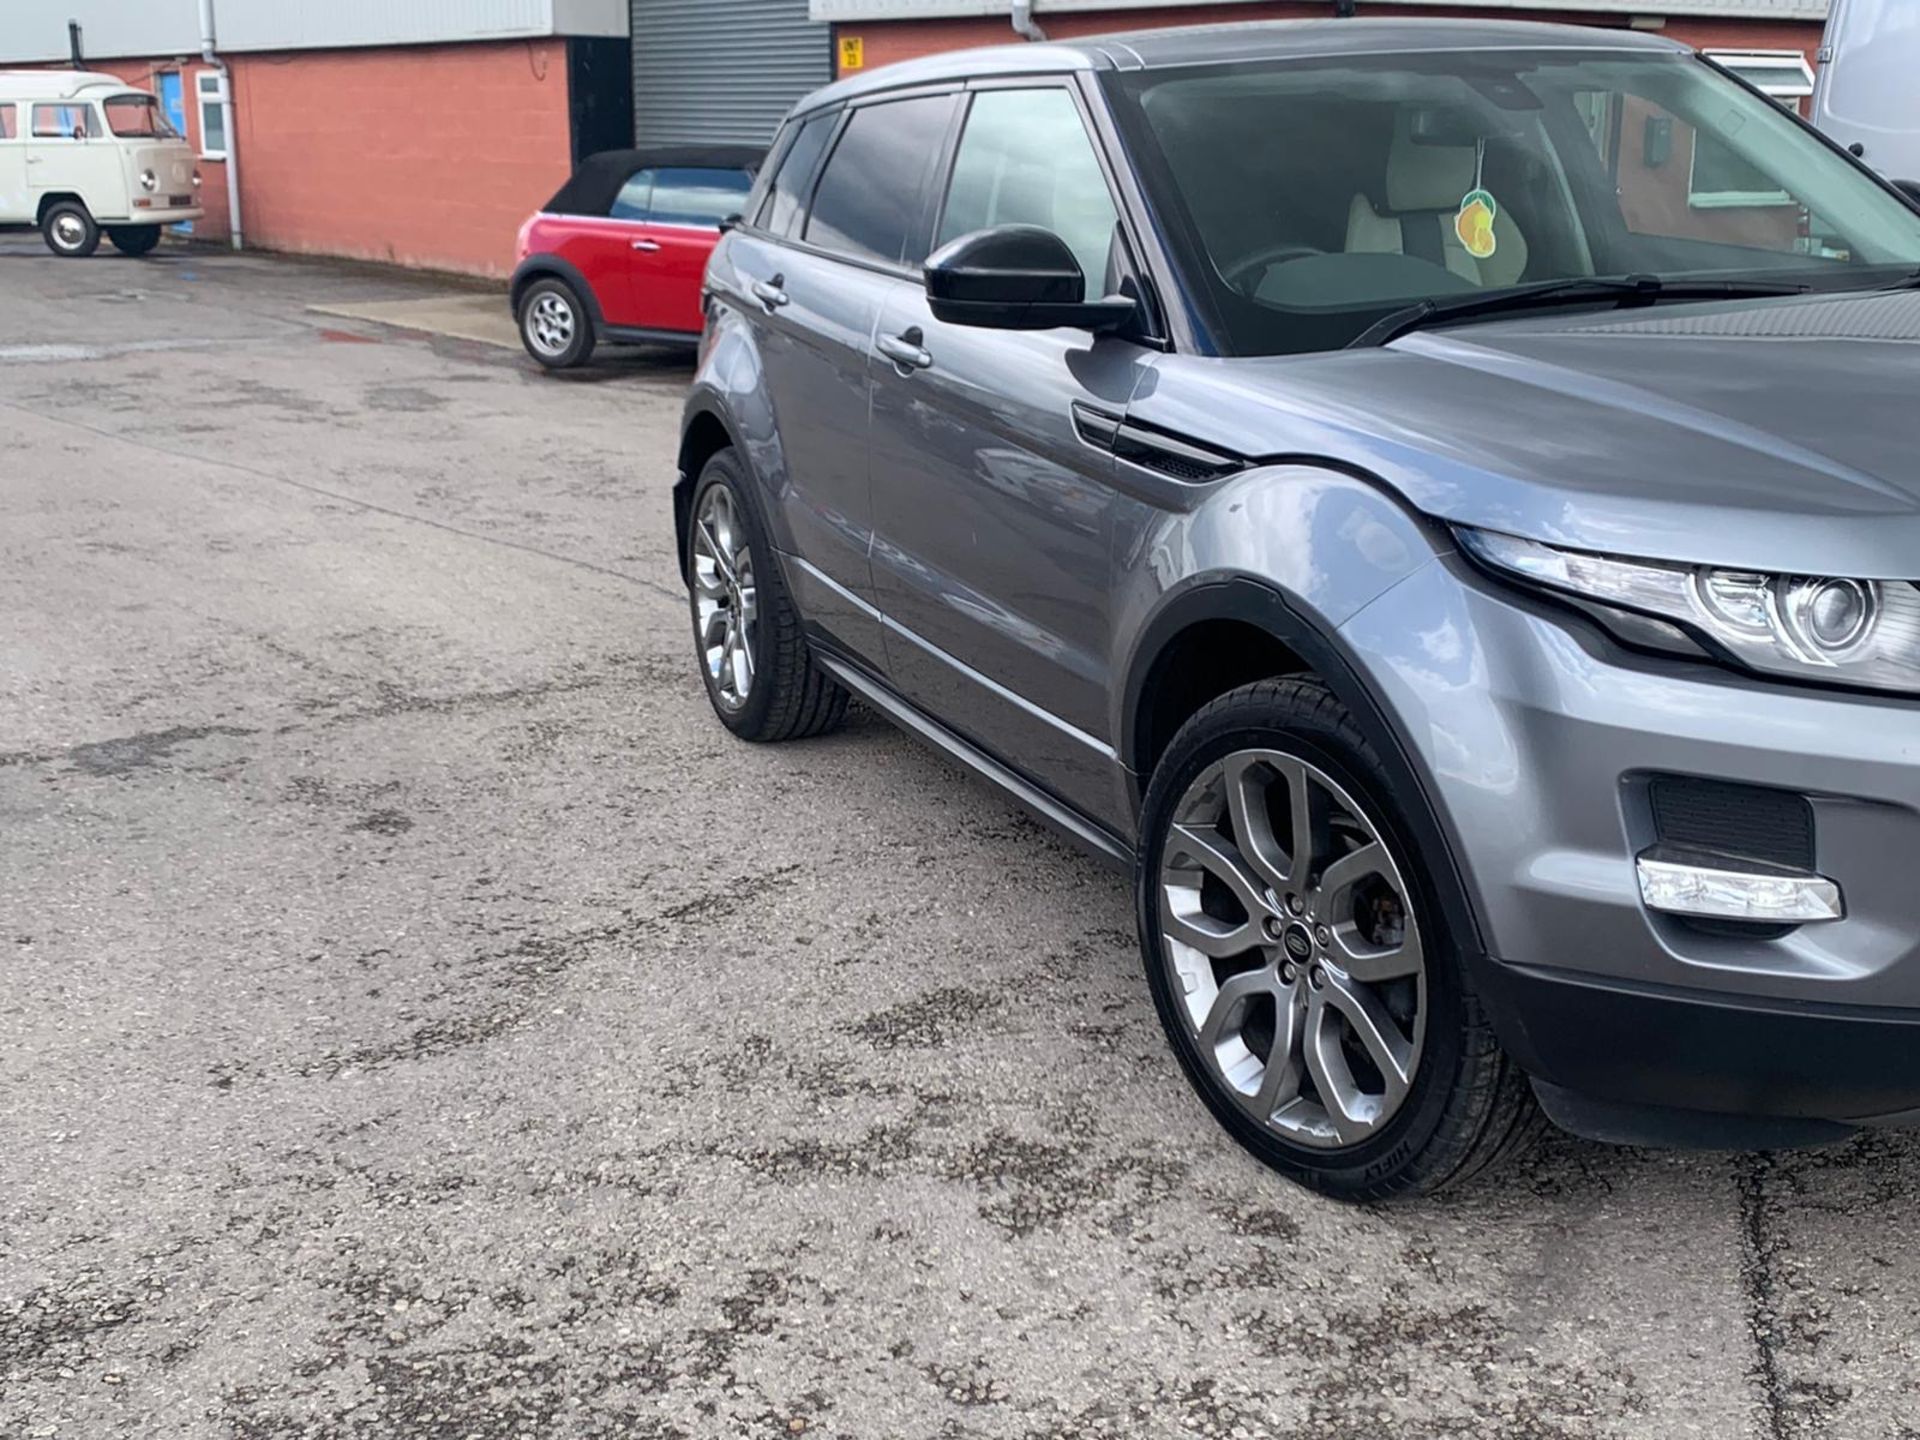 2014/14 REG LAND ROVER RANGE ROVER EVOQUE DYNAMIC S 2.2 DIESEL GREY, SHOWING 2 FORMER KEEPERS - Image 7 of 13